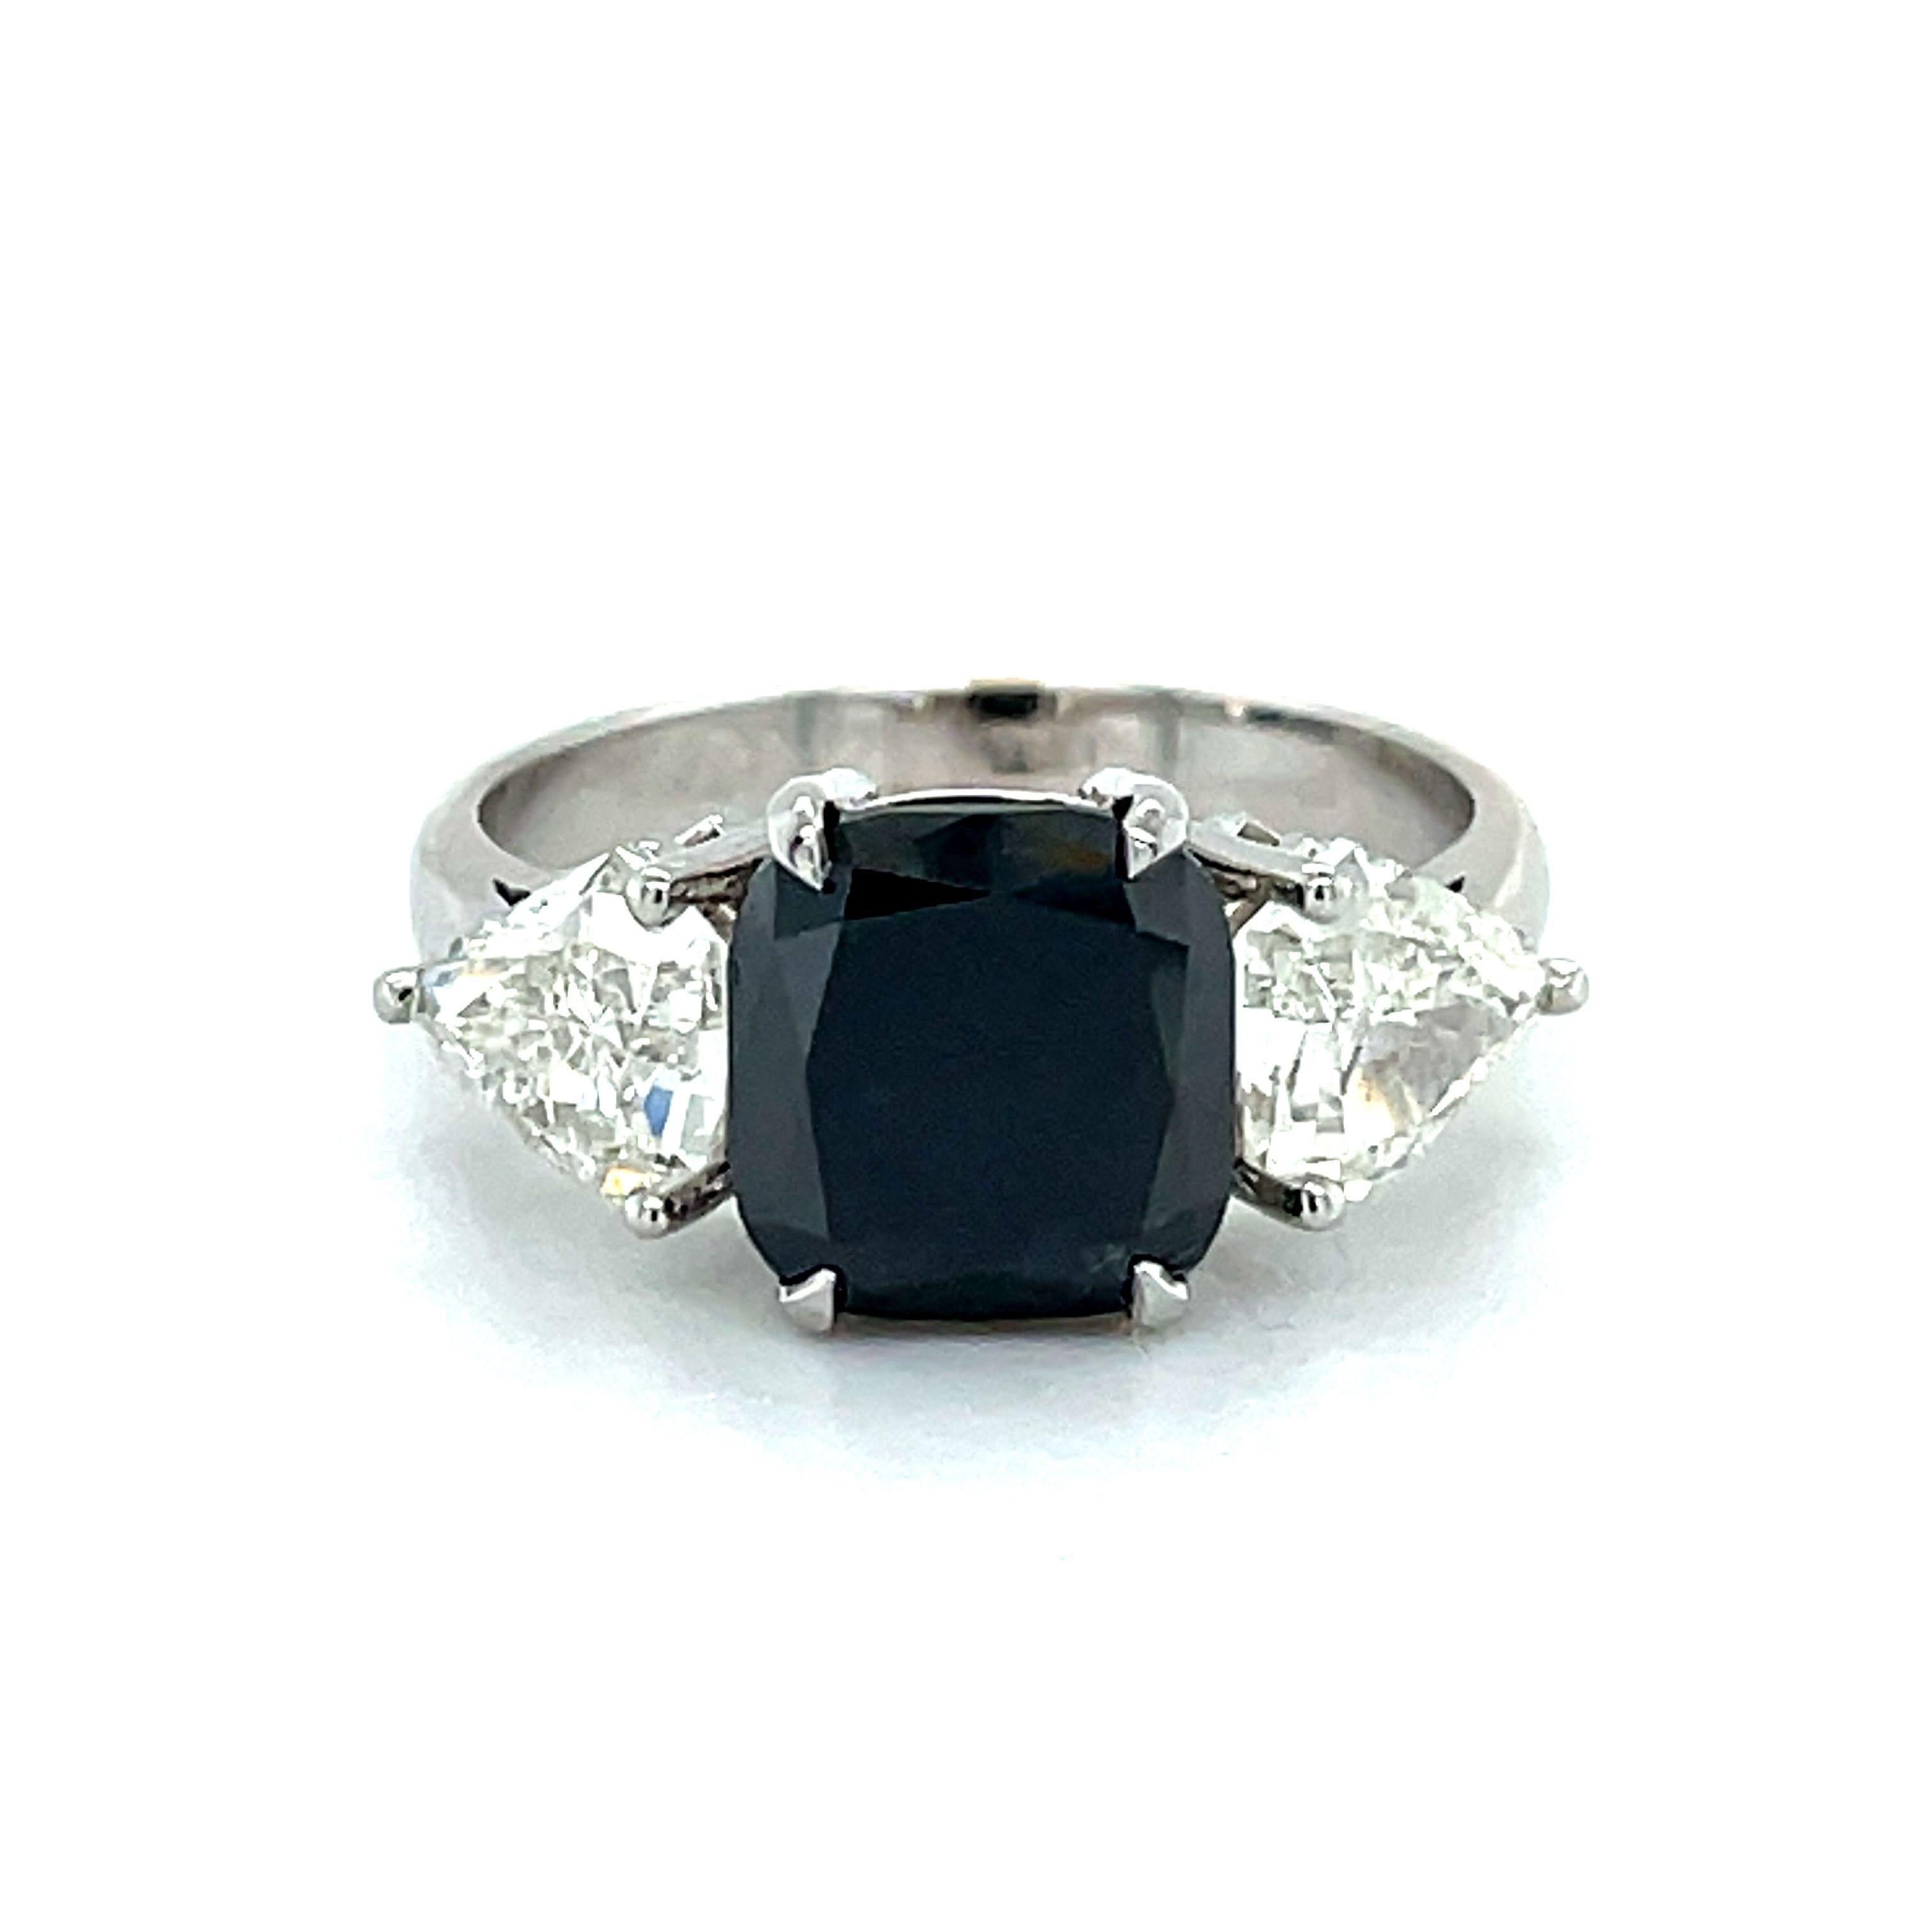 Black diamond Engagment ring,gothic ring, one of a king engagment ring, alternative engagement ring  2.35ct Black Diamond, Trillions cut side Diamonds 18K white gold

Jewelry Material: White Gold 18k (the gold has been tested by a